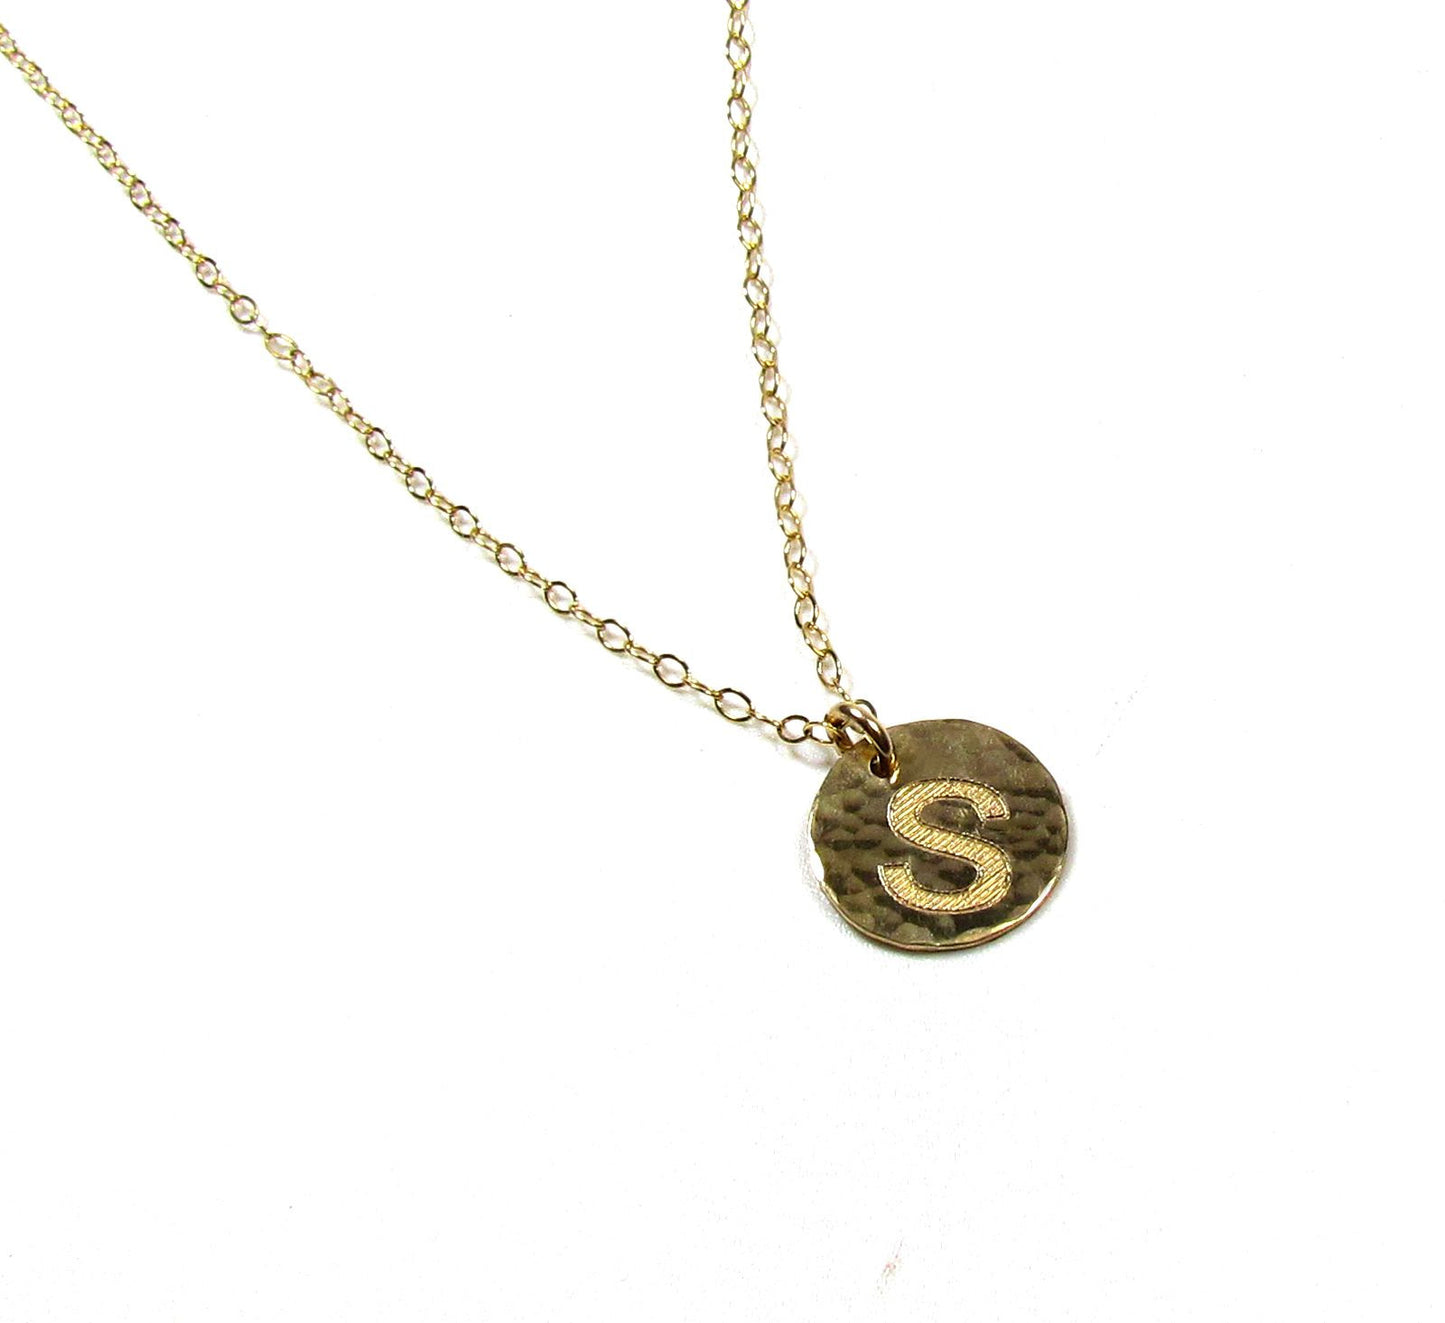 Hammered Disc Engraved Initial Necklace